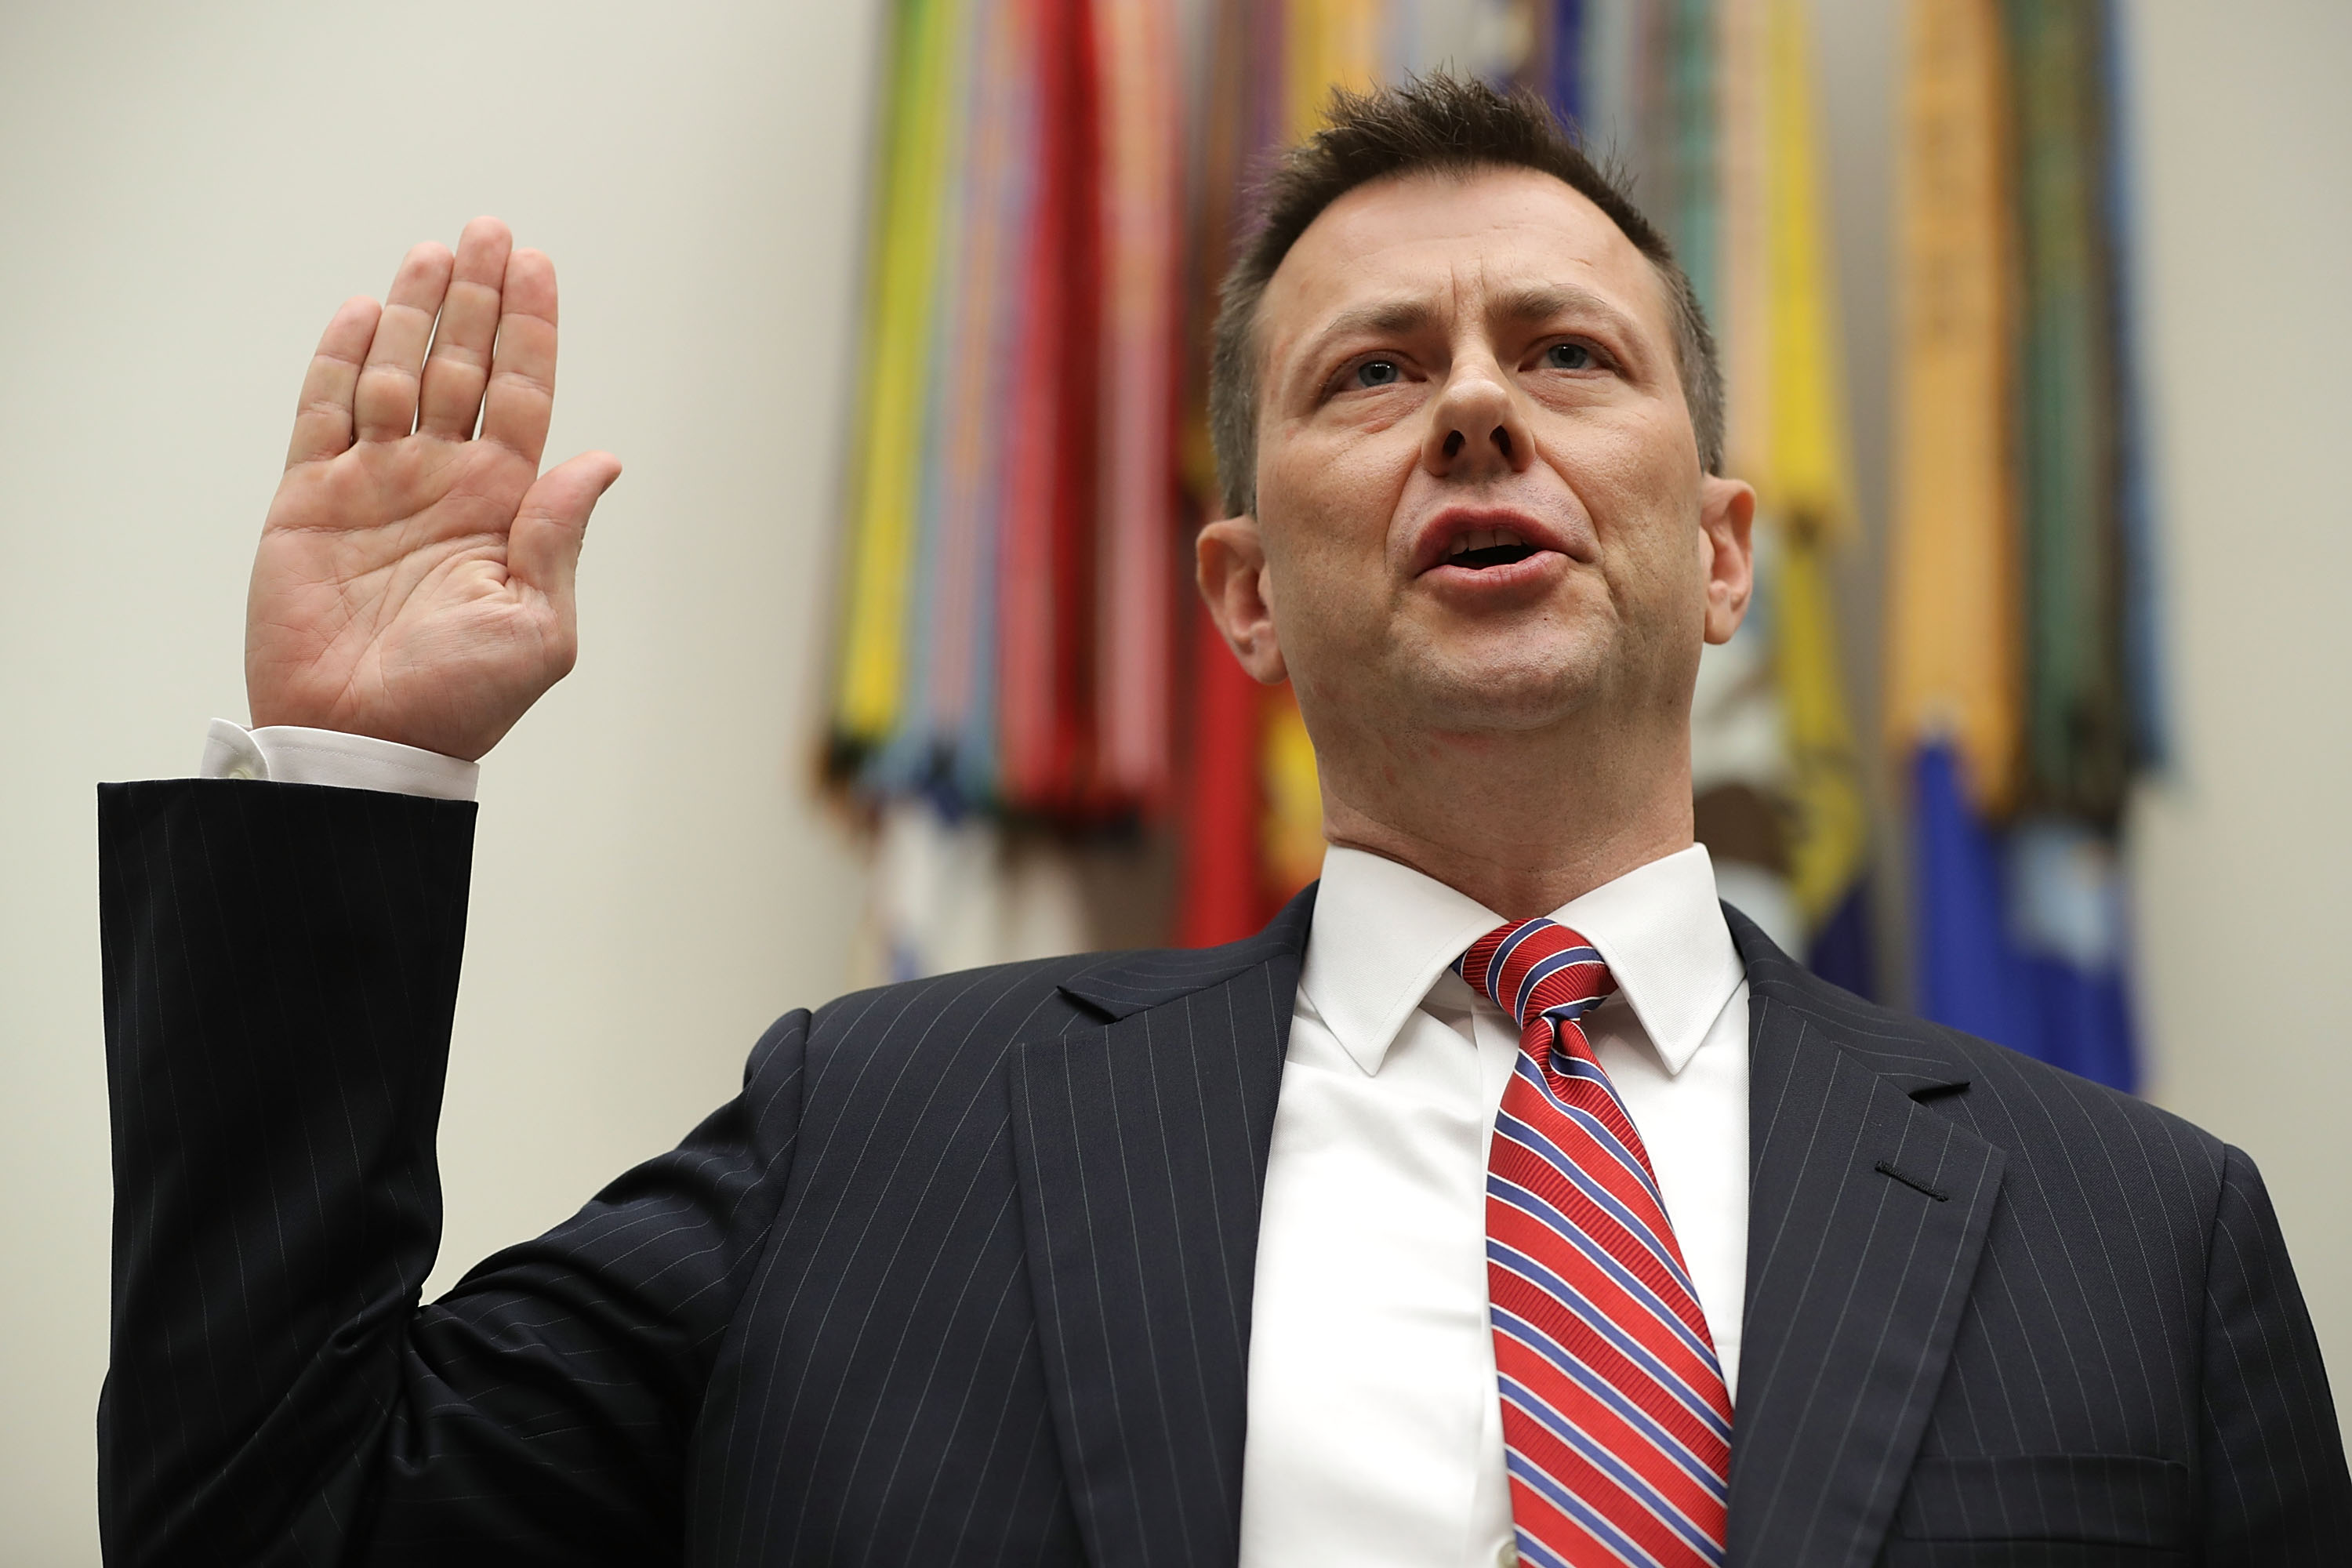 Deputy Assistant FBI Director Peter Strzok is sworn in before a joint committee hearing of the House Judiciary and Oversight and Government Reform committees in the Rayburn House Office Building on Capitol Hill July 12, 2018 in Washington, DC.